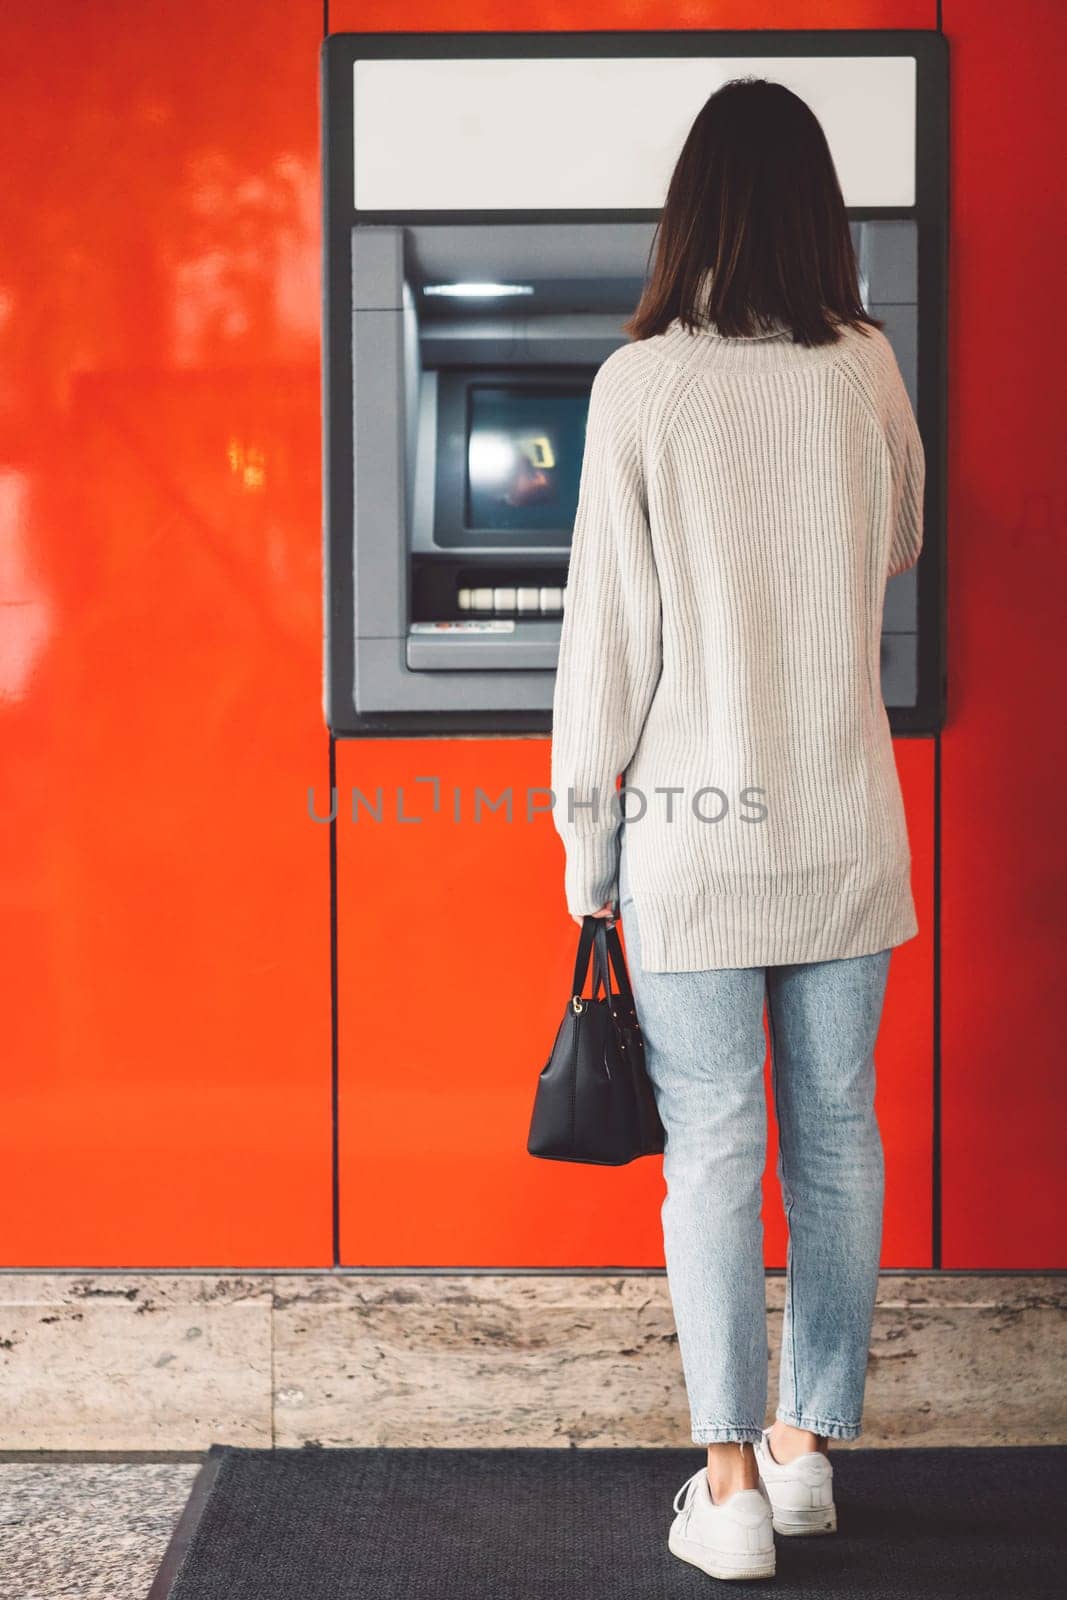 Vertical photo, back view of a woman standing in front of an ATM on a red wall, making a cash withdrawal by VisualProductions